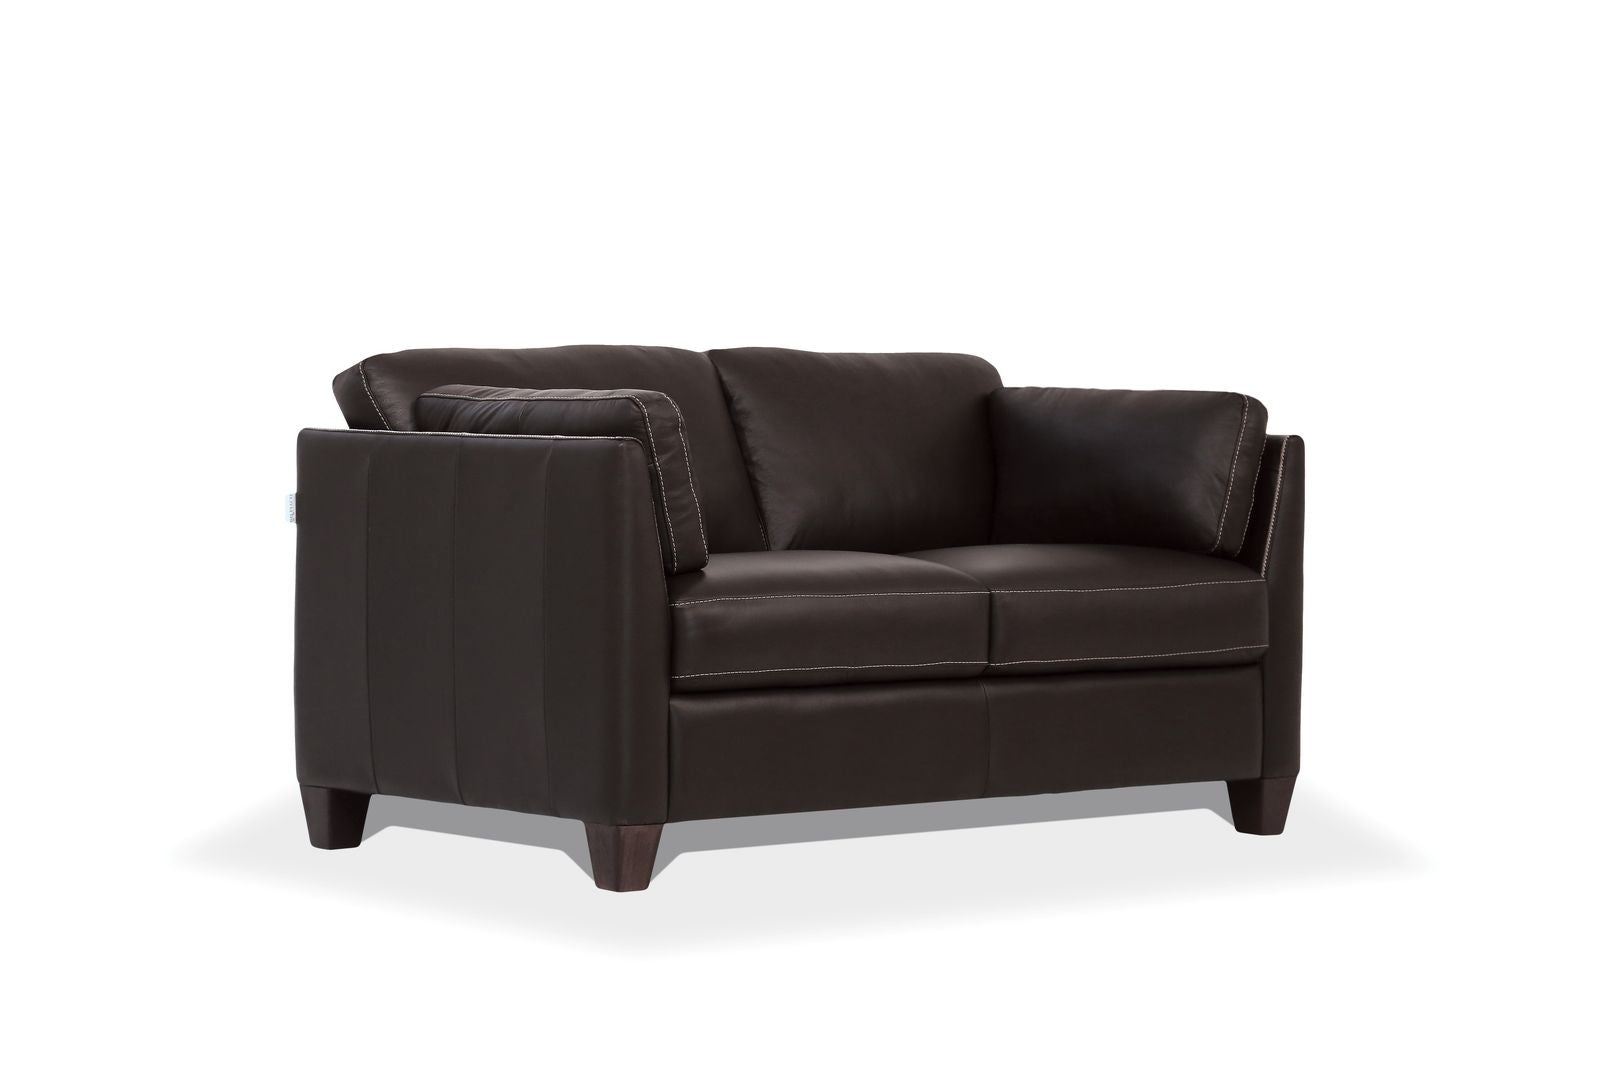 59" Chocolate And Brown Leather Loveseat